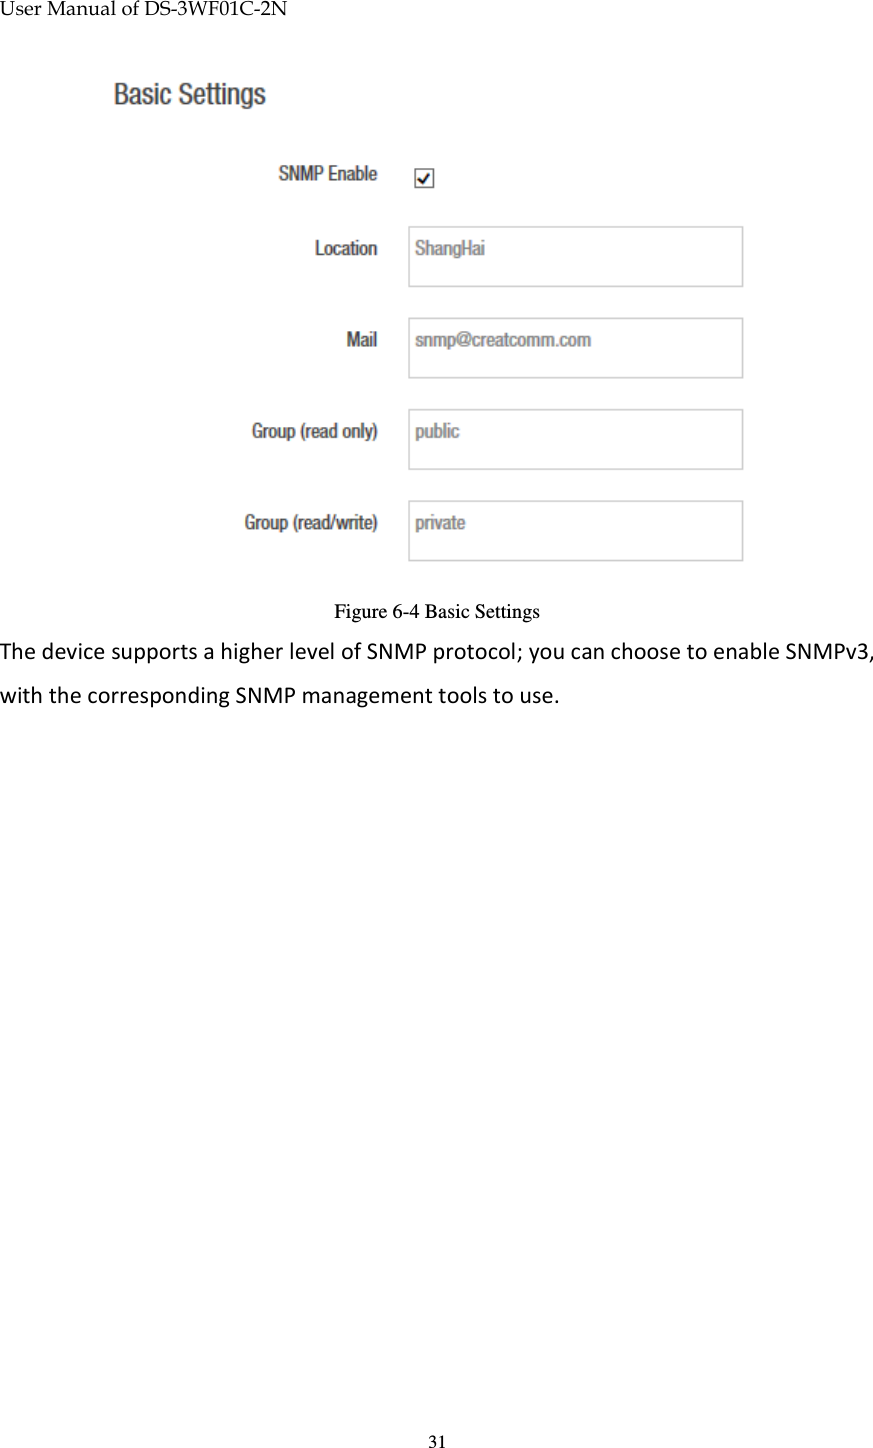 User Manual of DS-3WF01C-2N   31 Figure 6-4 Basic Settings The device supports a higher level of SNMP protocol; you can choose to enable SNMPv3, with the corresponding SNMP management tools to use. 